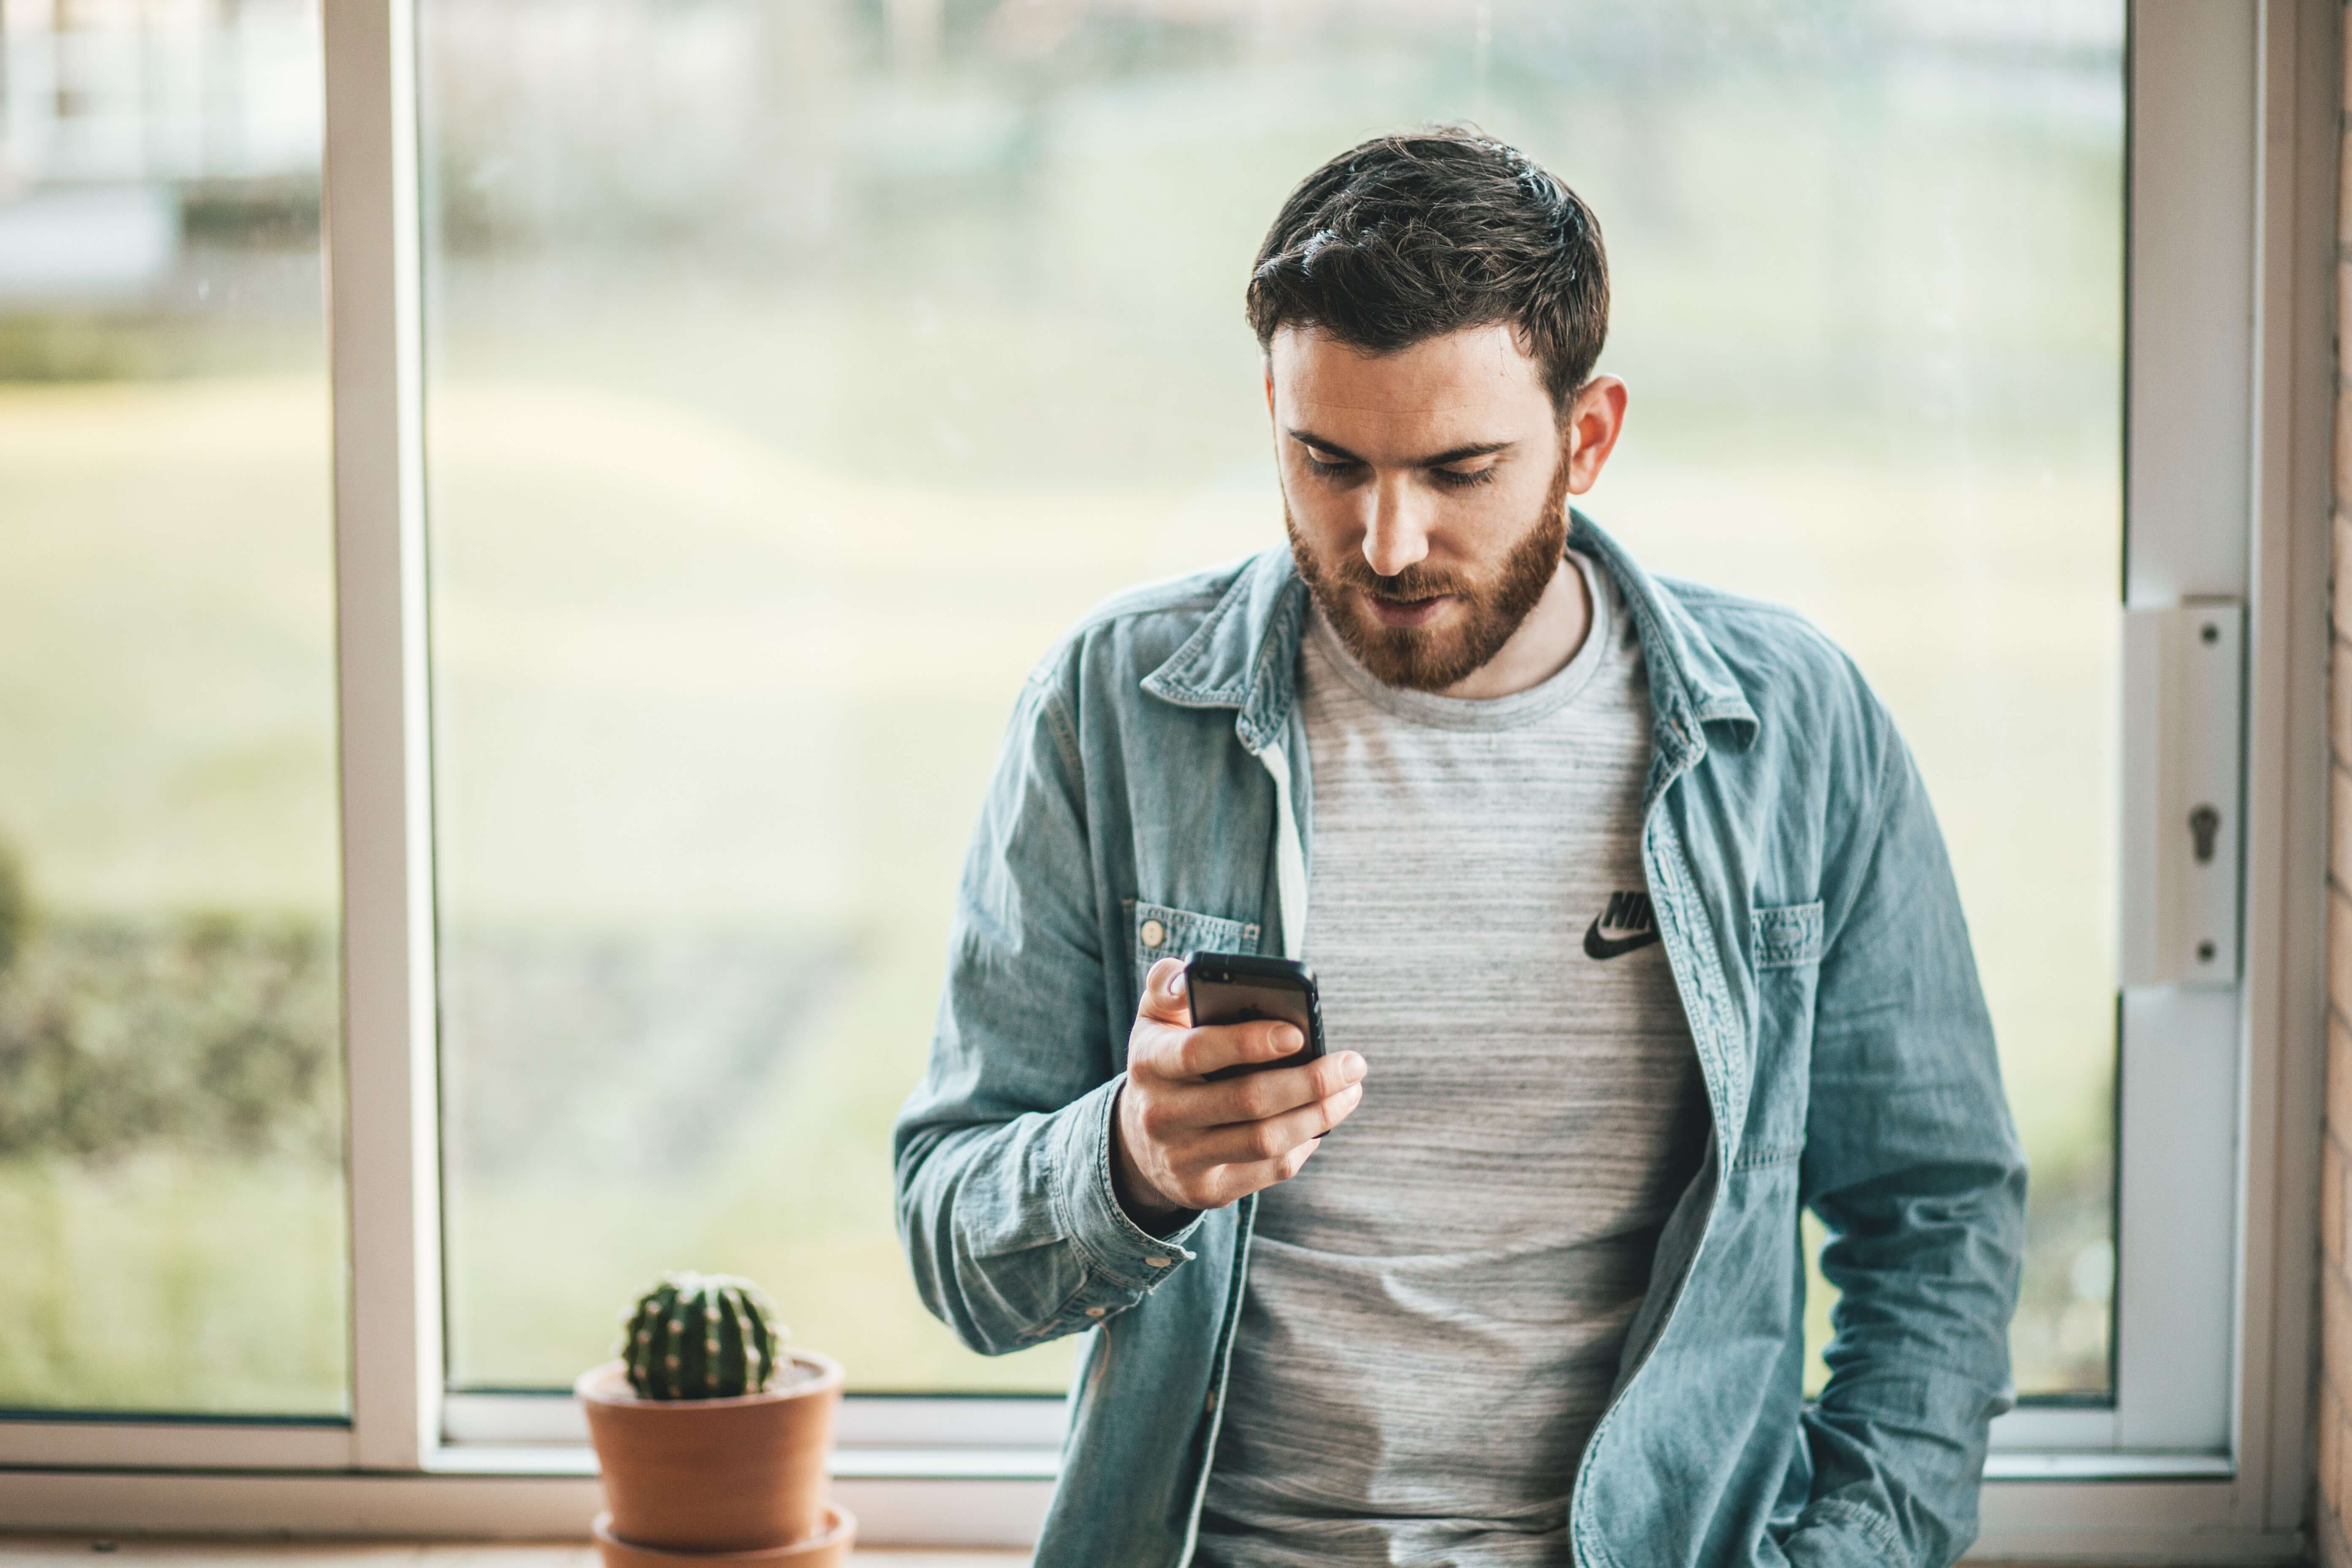 A focused young man in a casual denim jacket and grey shirt intently checking his smartphone by a bright window, with a small potted cactus on the windowsill adding a touch of greenery to the serene indoor setting.